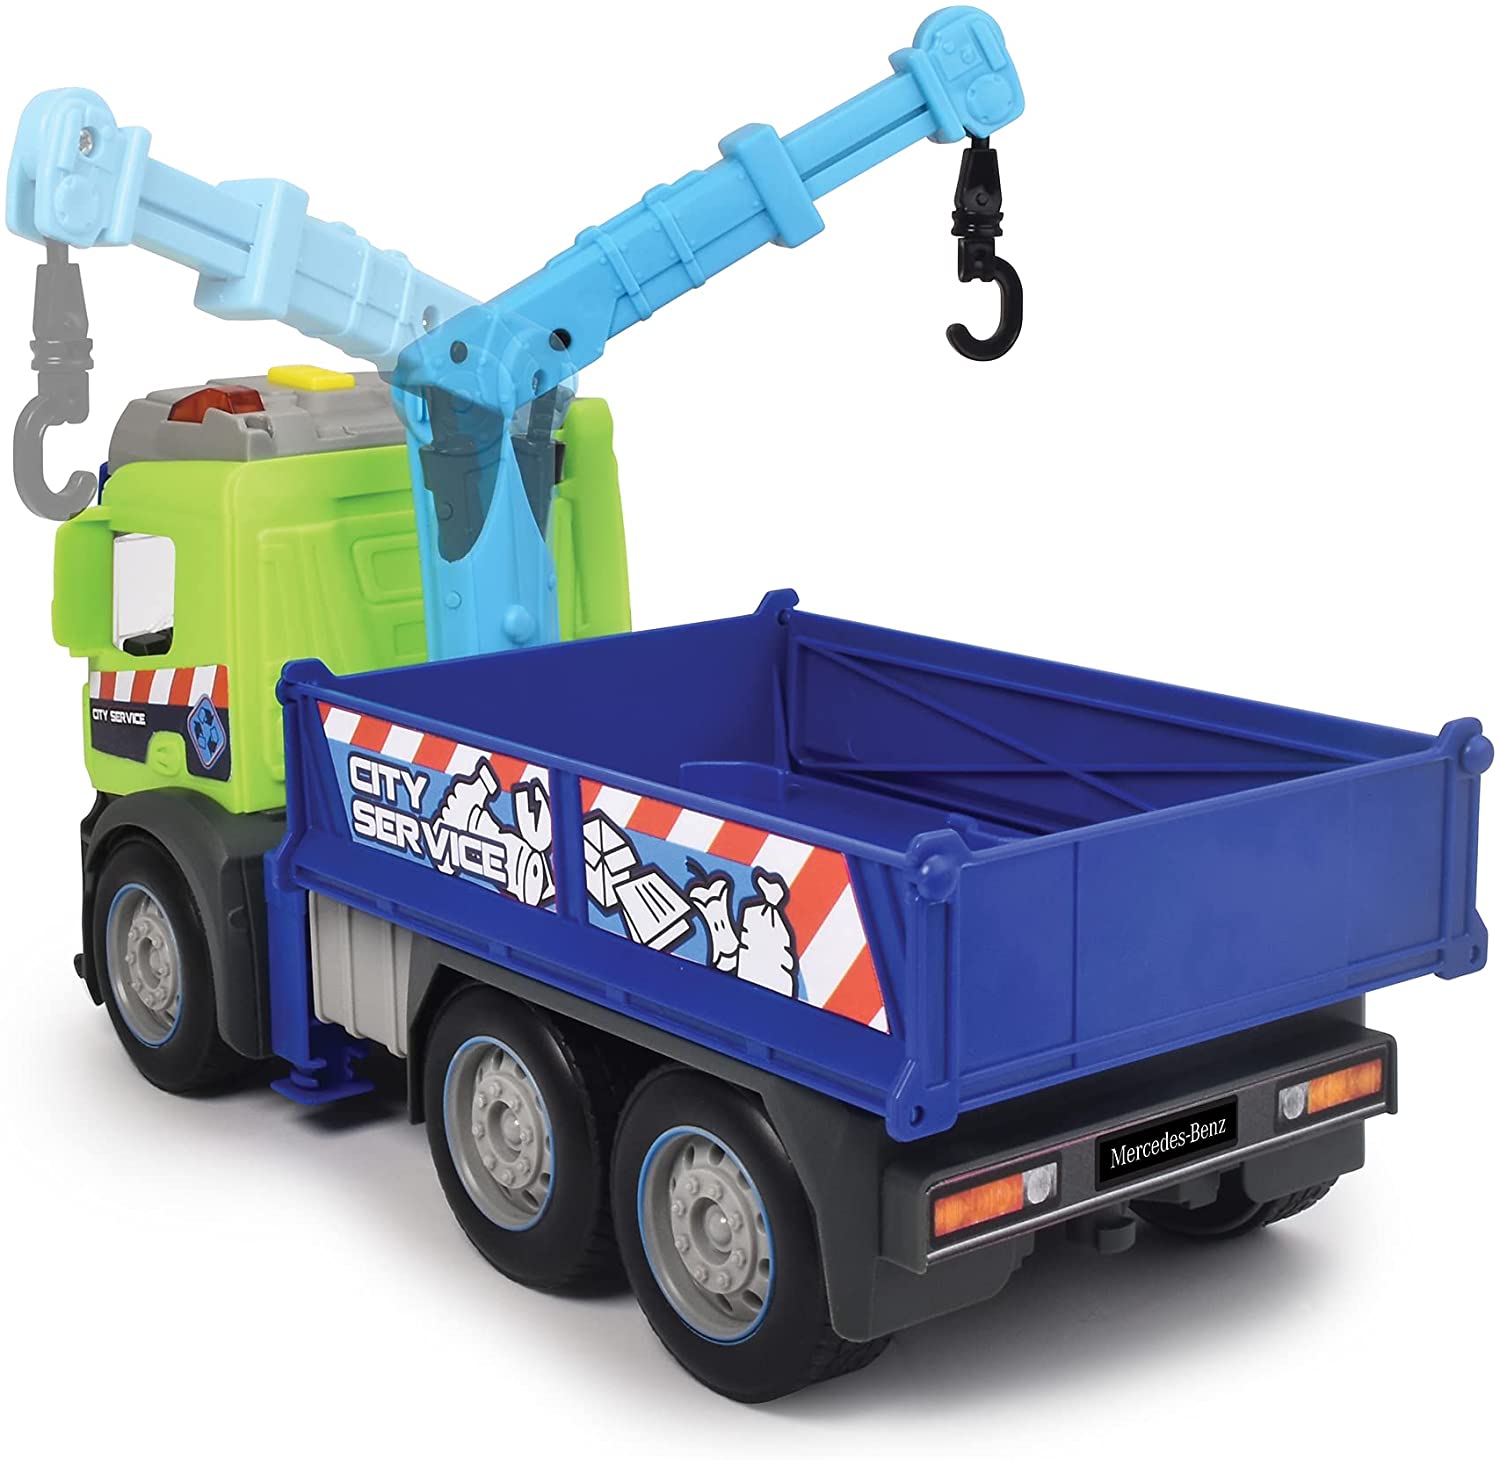 Masina - Truck-Recycling - Green-Blue, 26 cm | Dickie Toys - 3